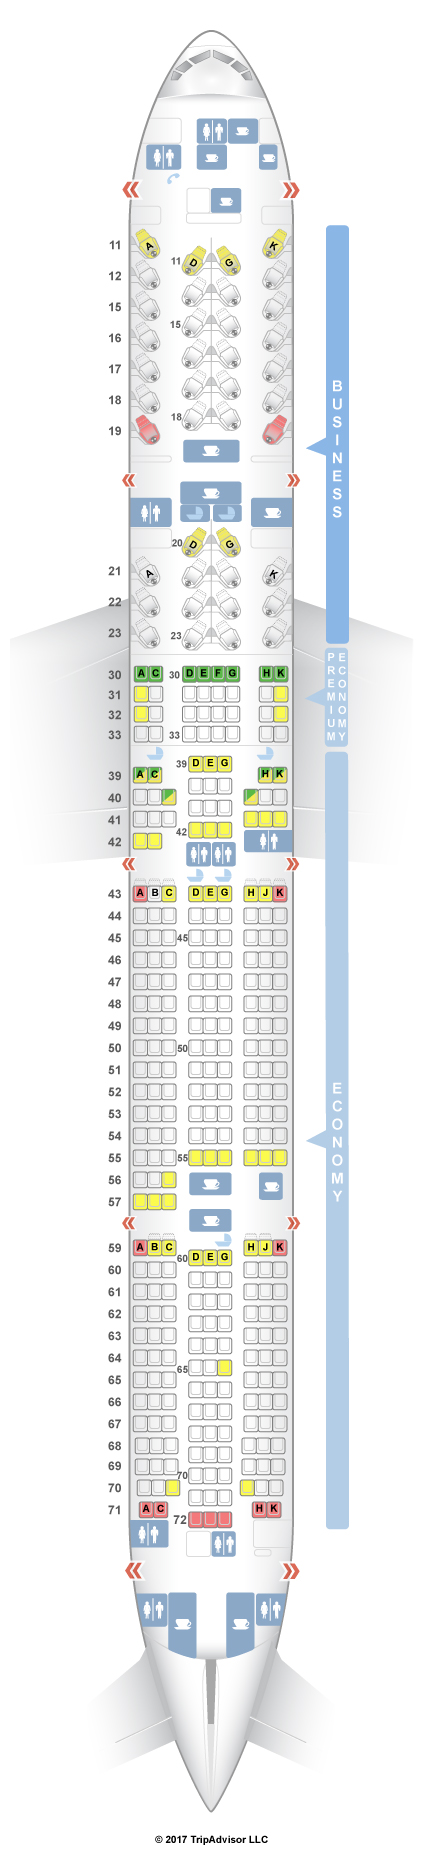 Where can you find a Boeing 777-300ER seat map?